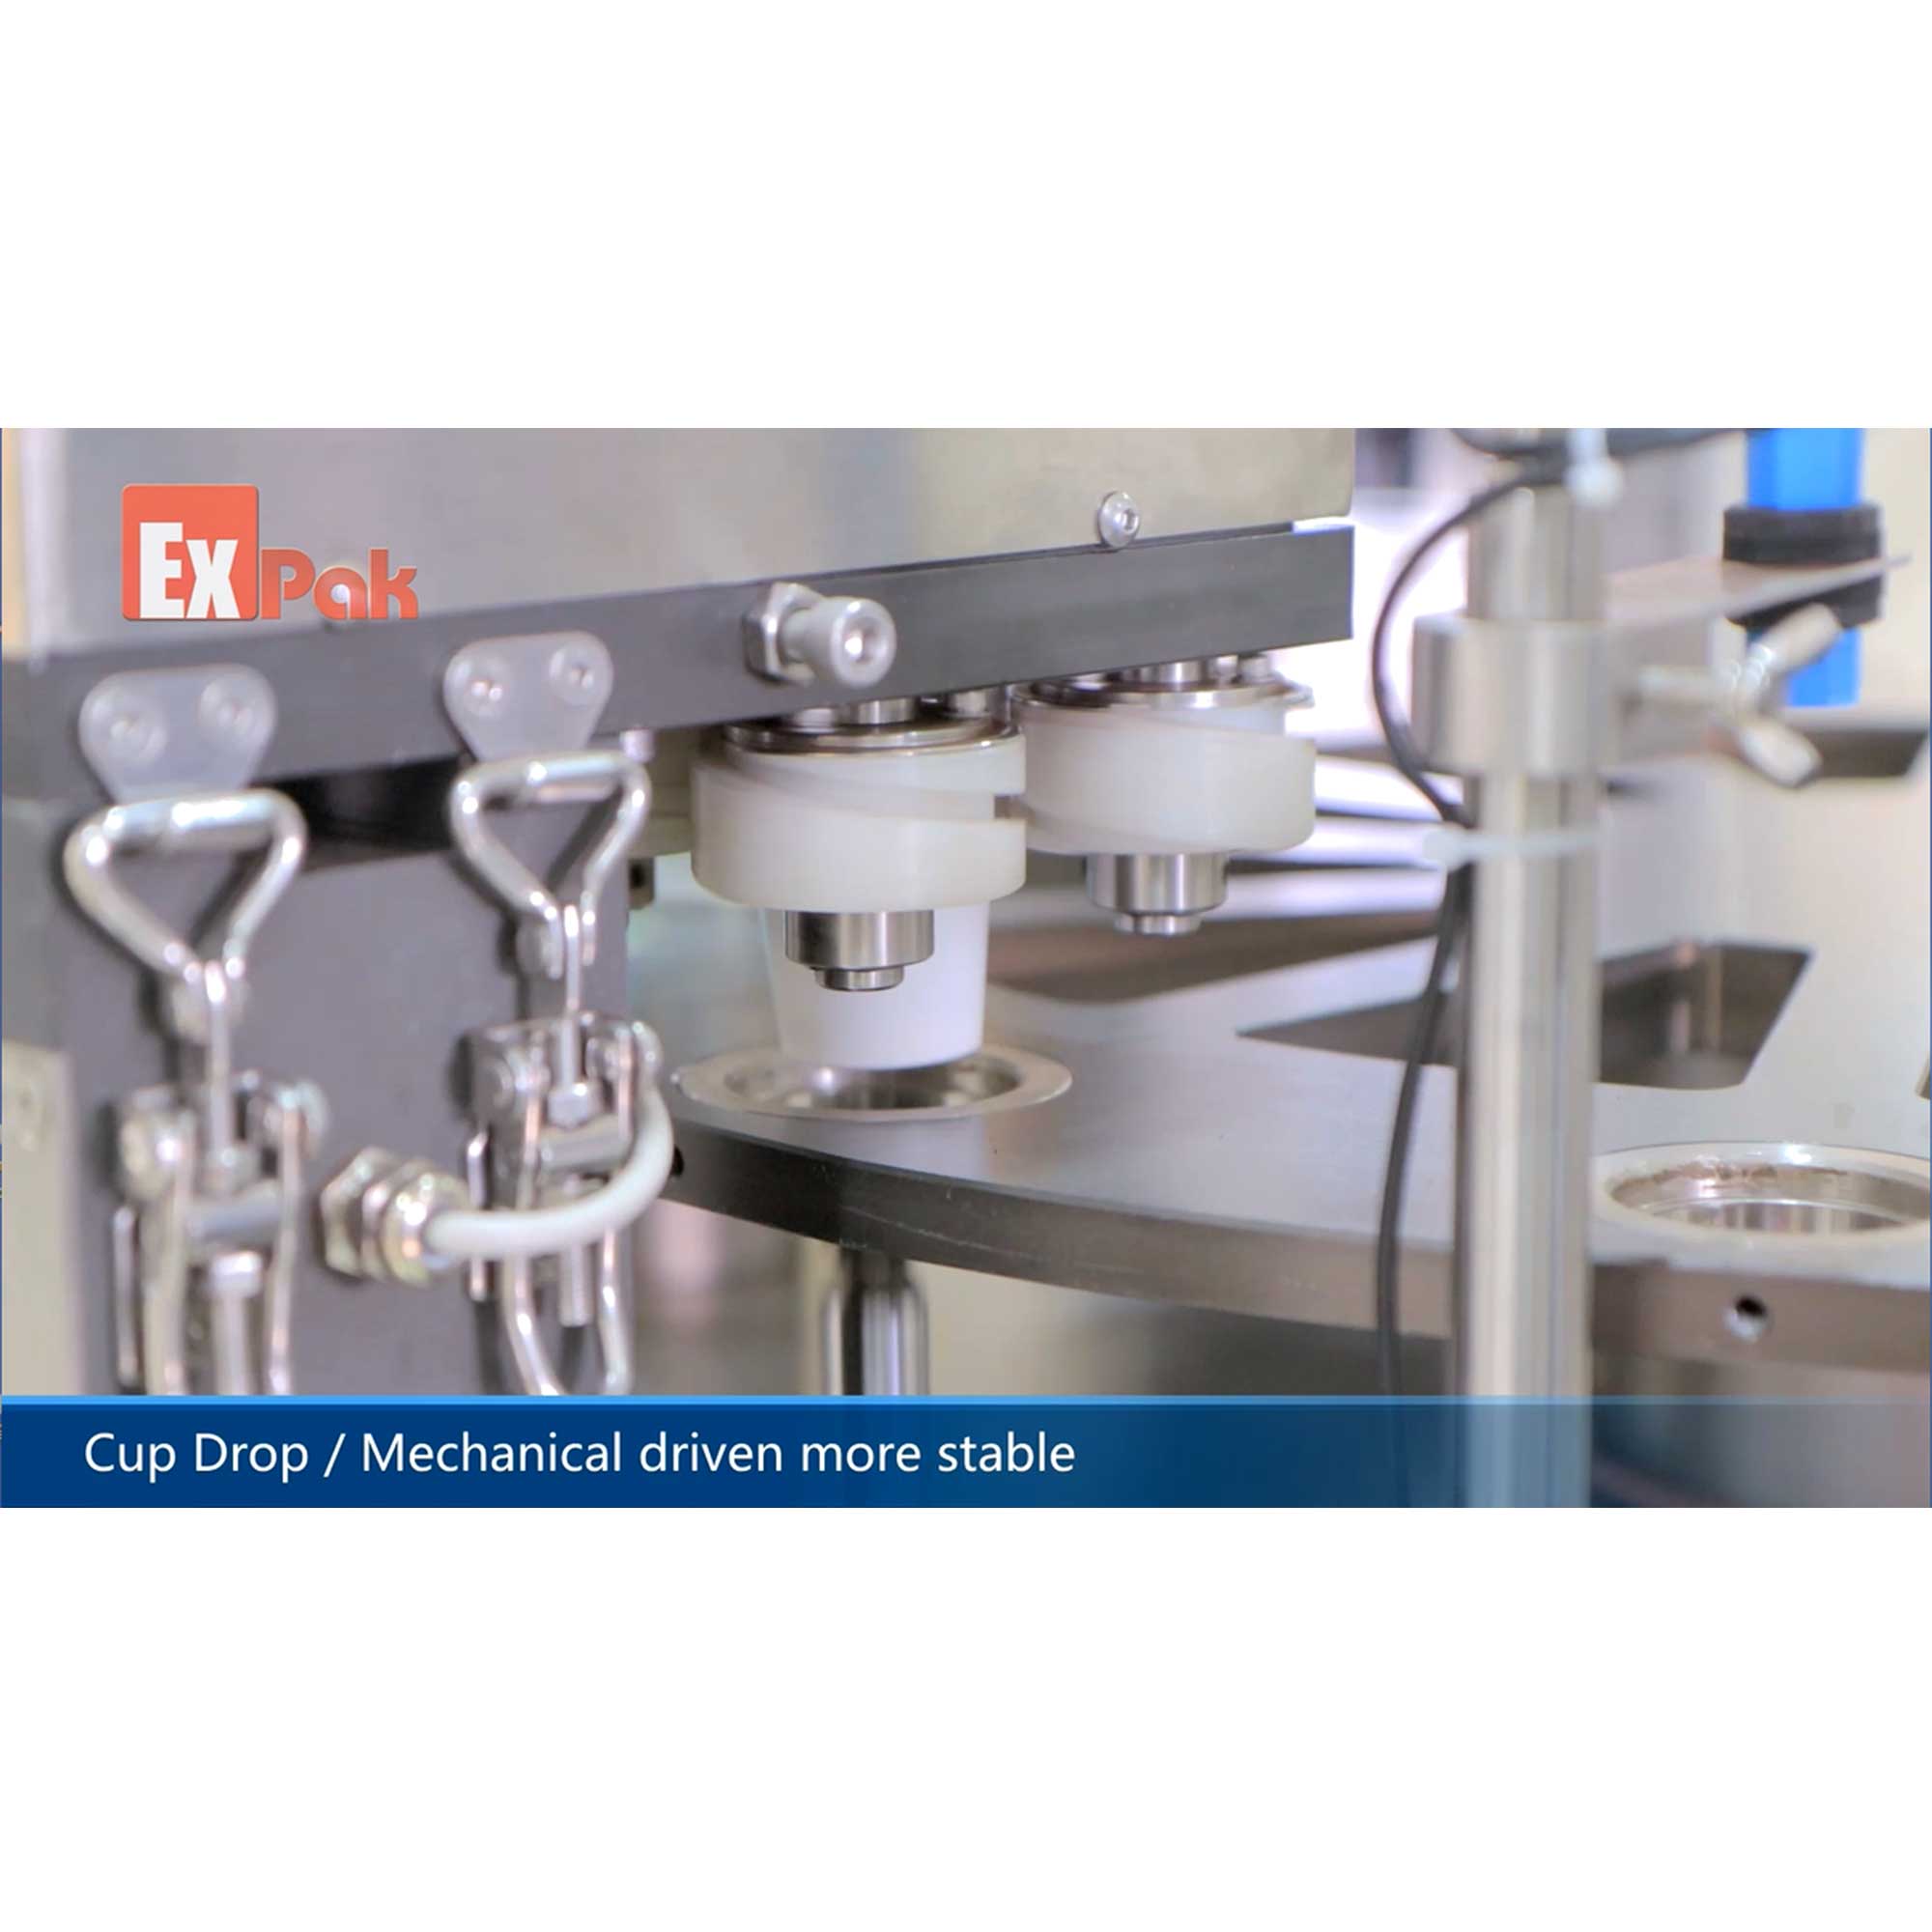 K-cup Filling and Sealing Machine - Expak CR90 Rotary w/Vacuum Conveyor - 75 CPM